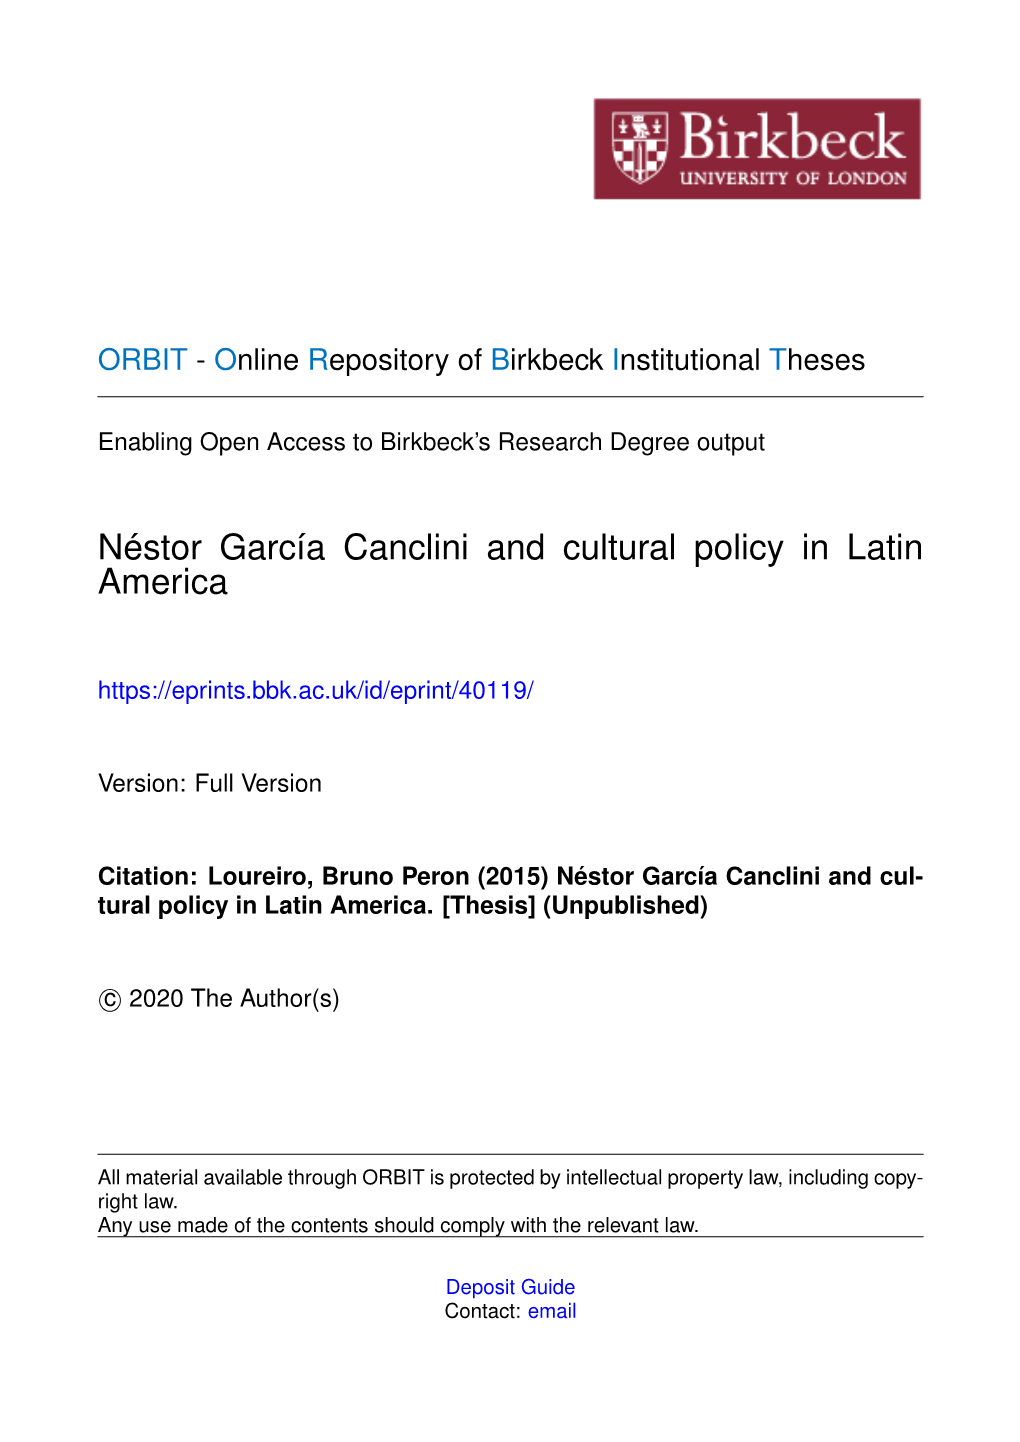 Néstor García Canclini and Cultural Policy in Latin America